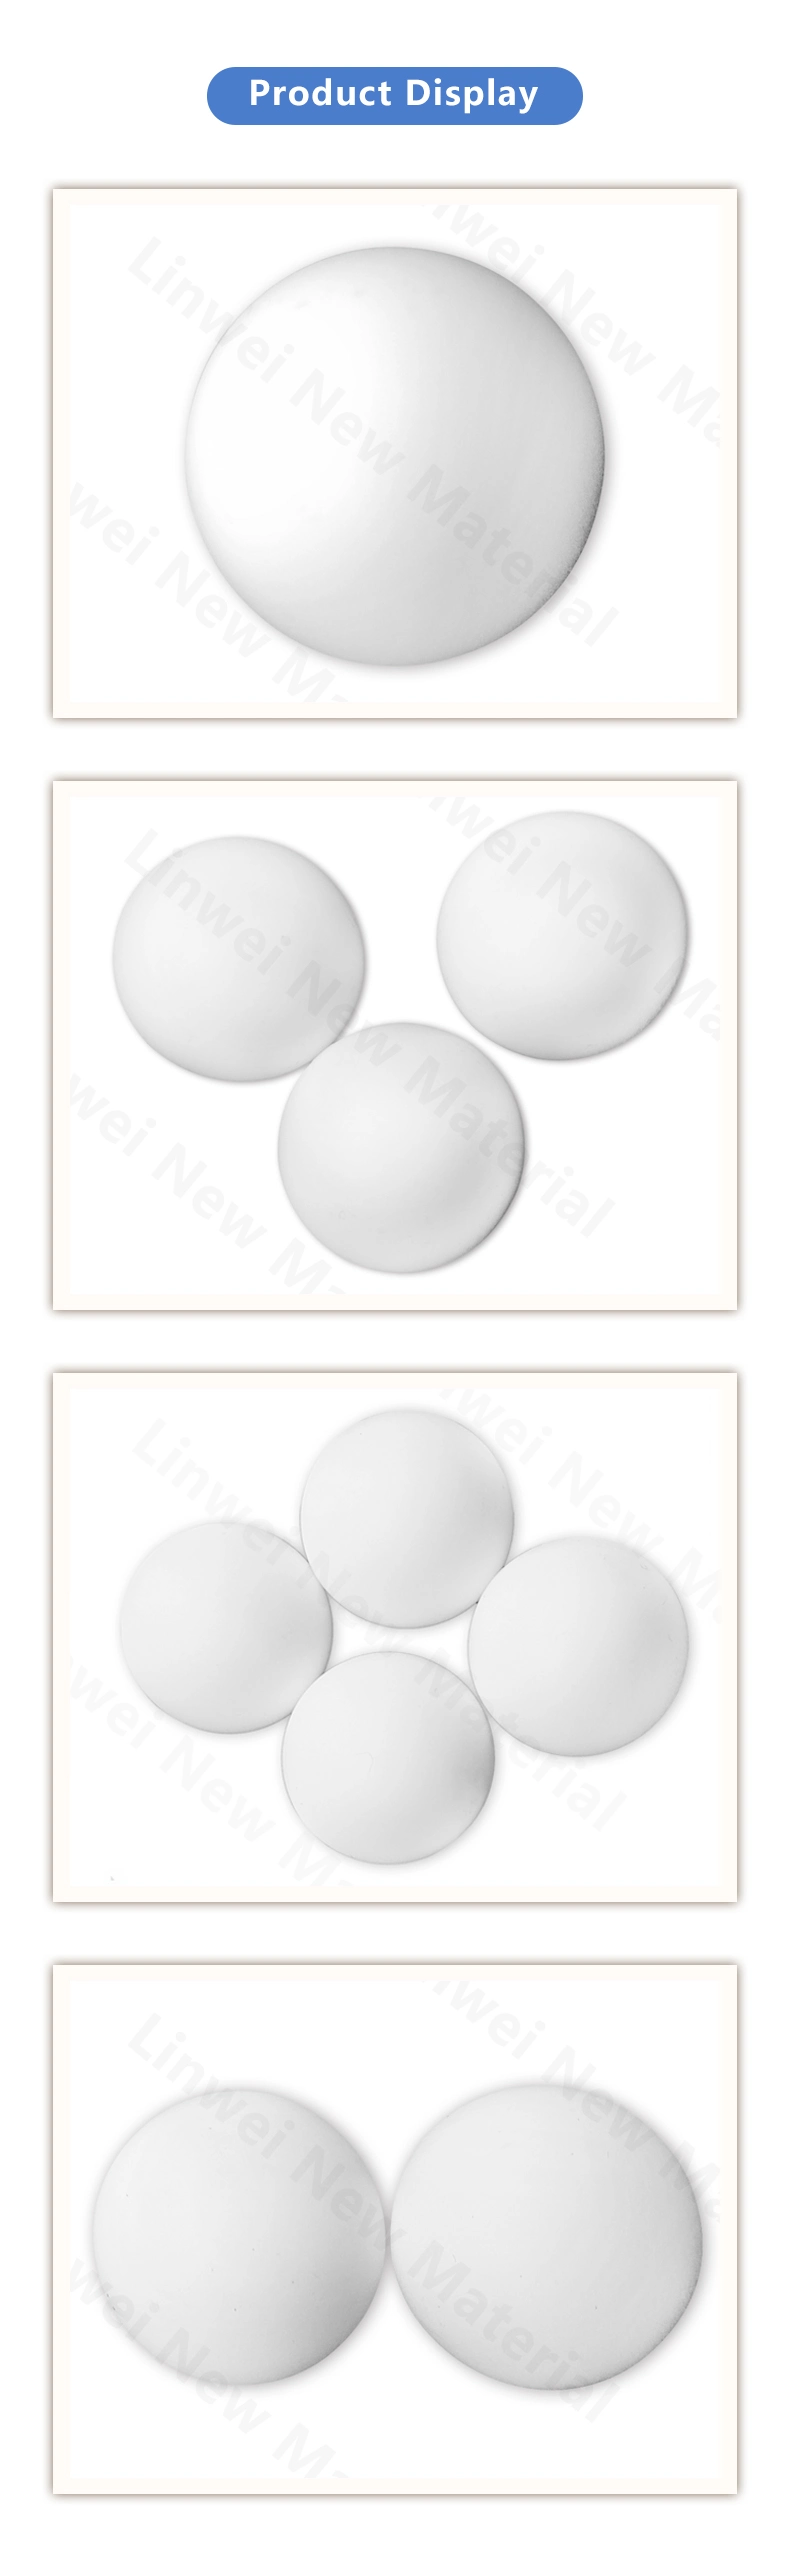 High-Precision Wear-Resistant and Corrosion-Resistant PTFE Ball